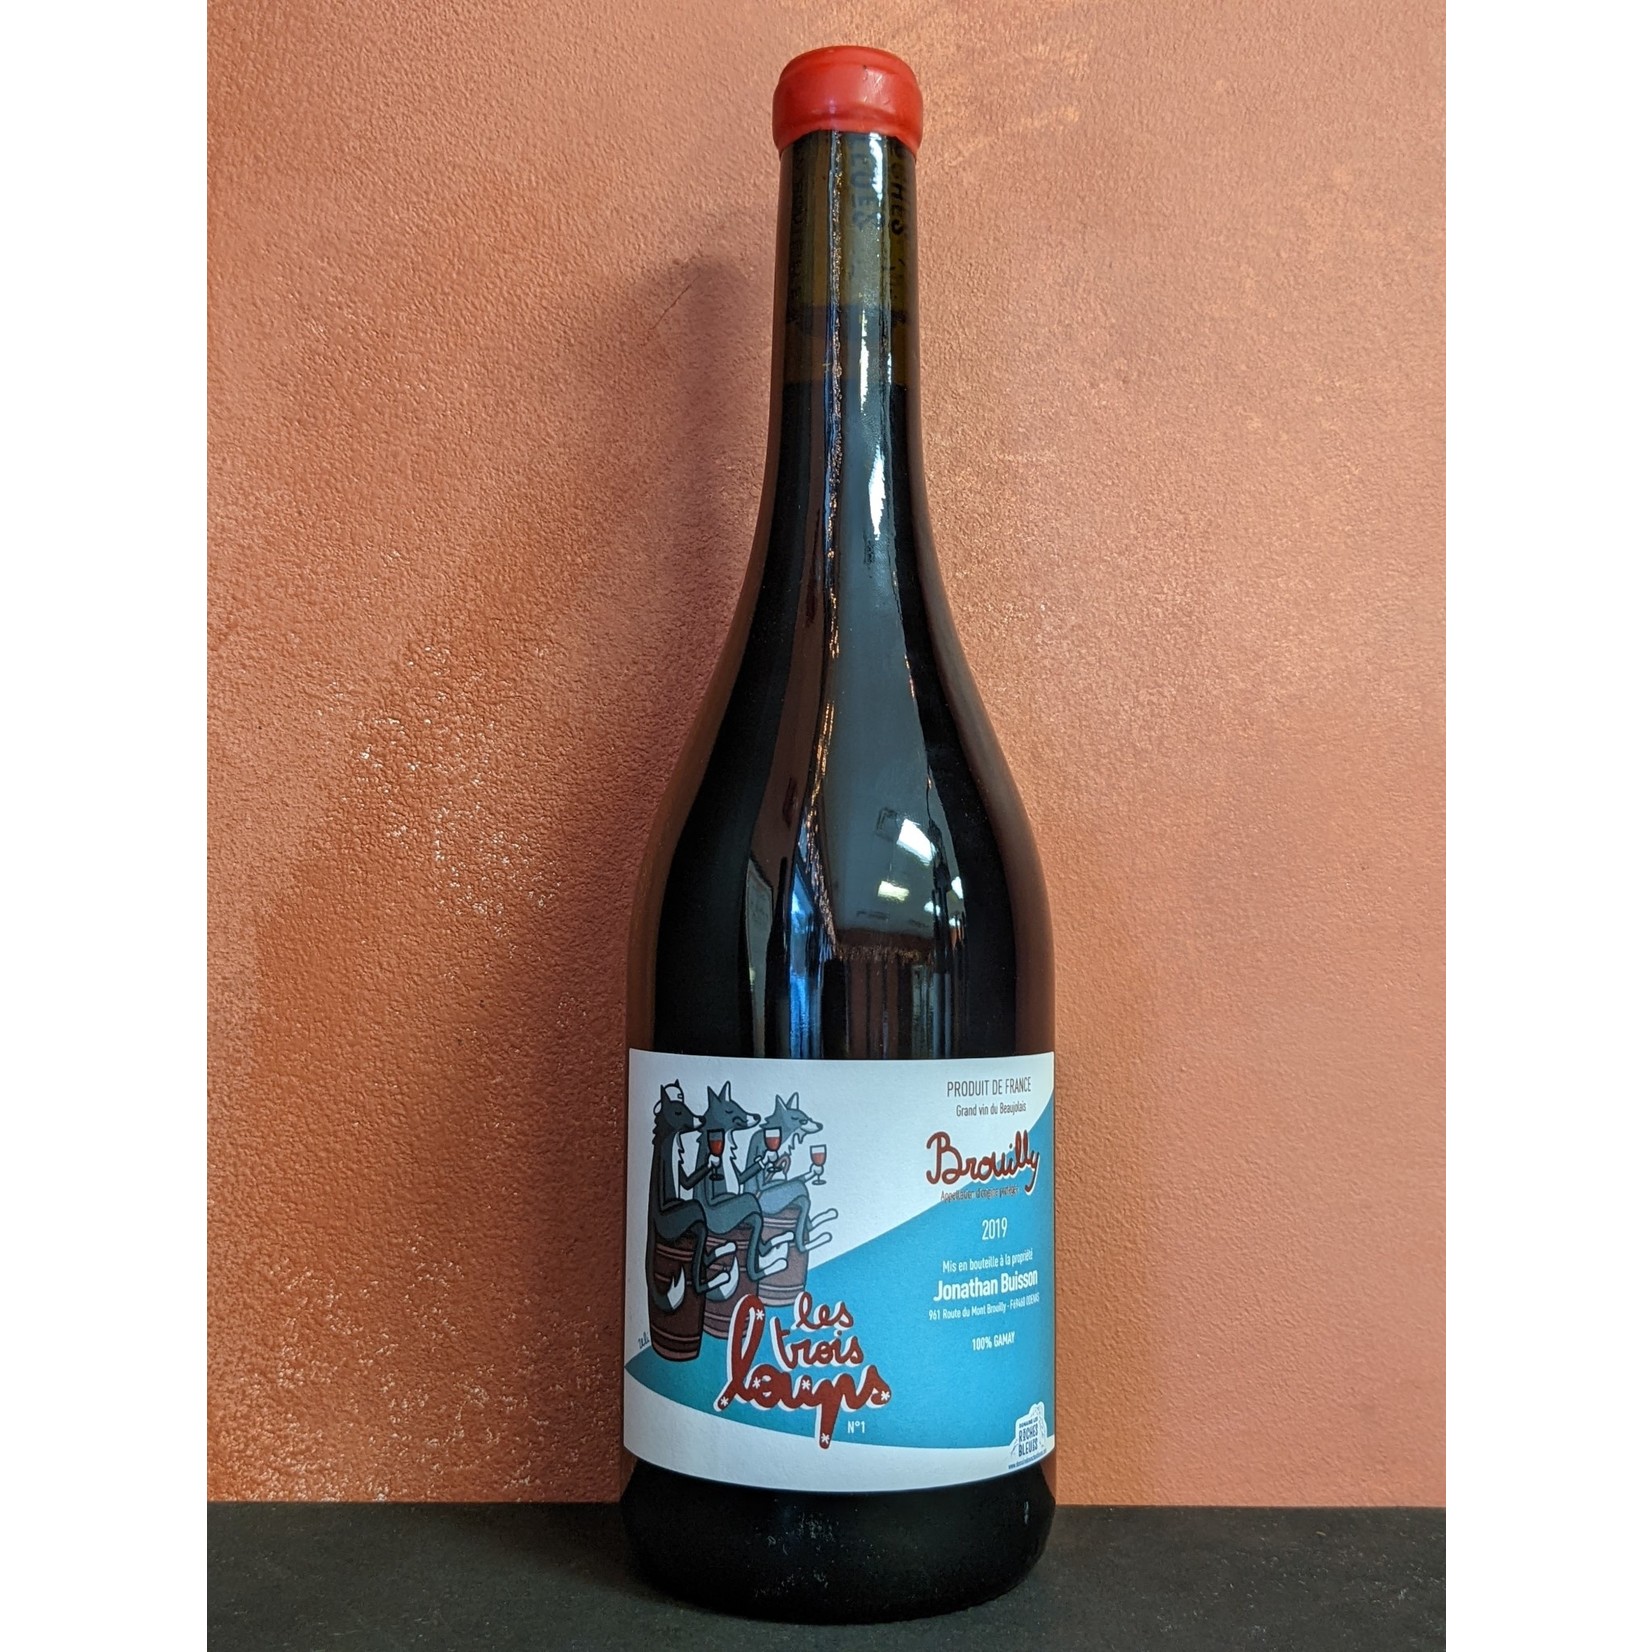 2019 Gamay, Domaine Les Roches Bleues Brouilly "Les Trois Loups"